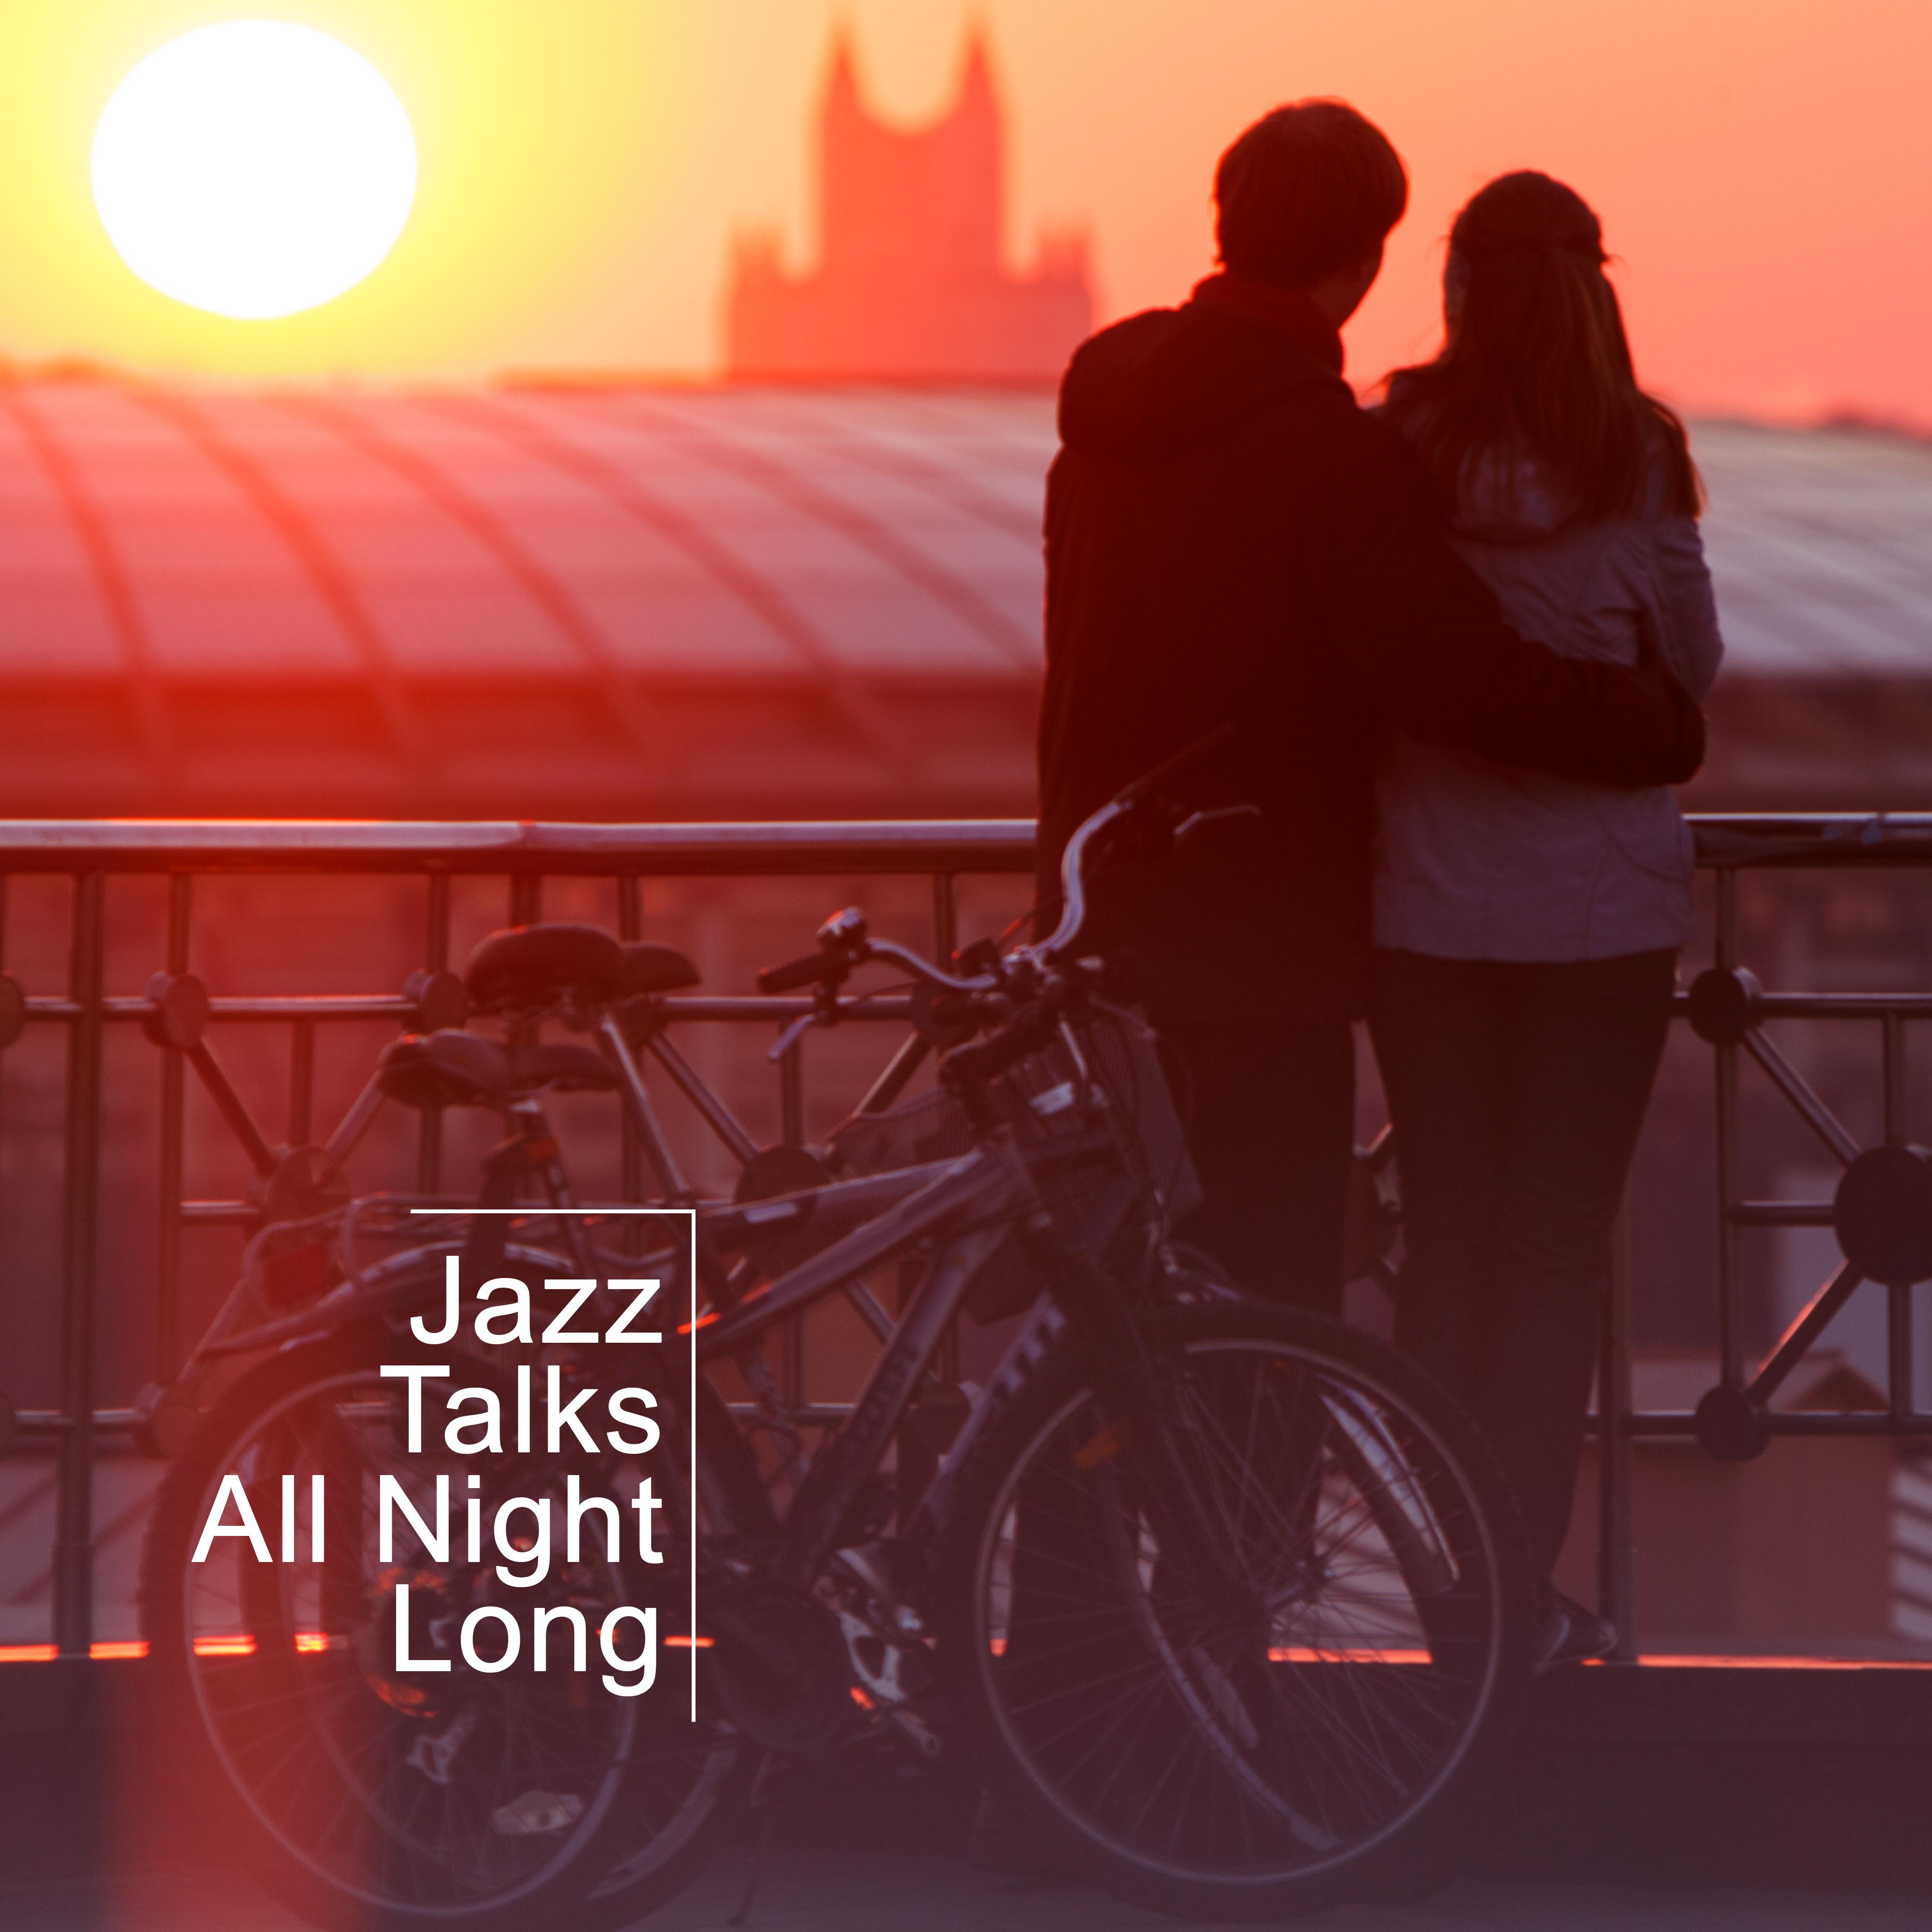 Jazz Talks All Night Long: Smooth Jazz 2019 Instrumentals, Perfect Background Music for Friends Meeting in the Club or at Home, Vintage Soft Melodies